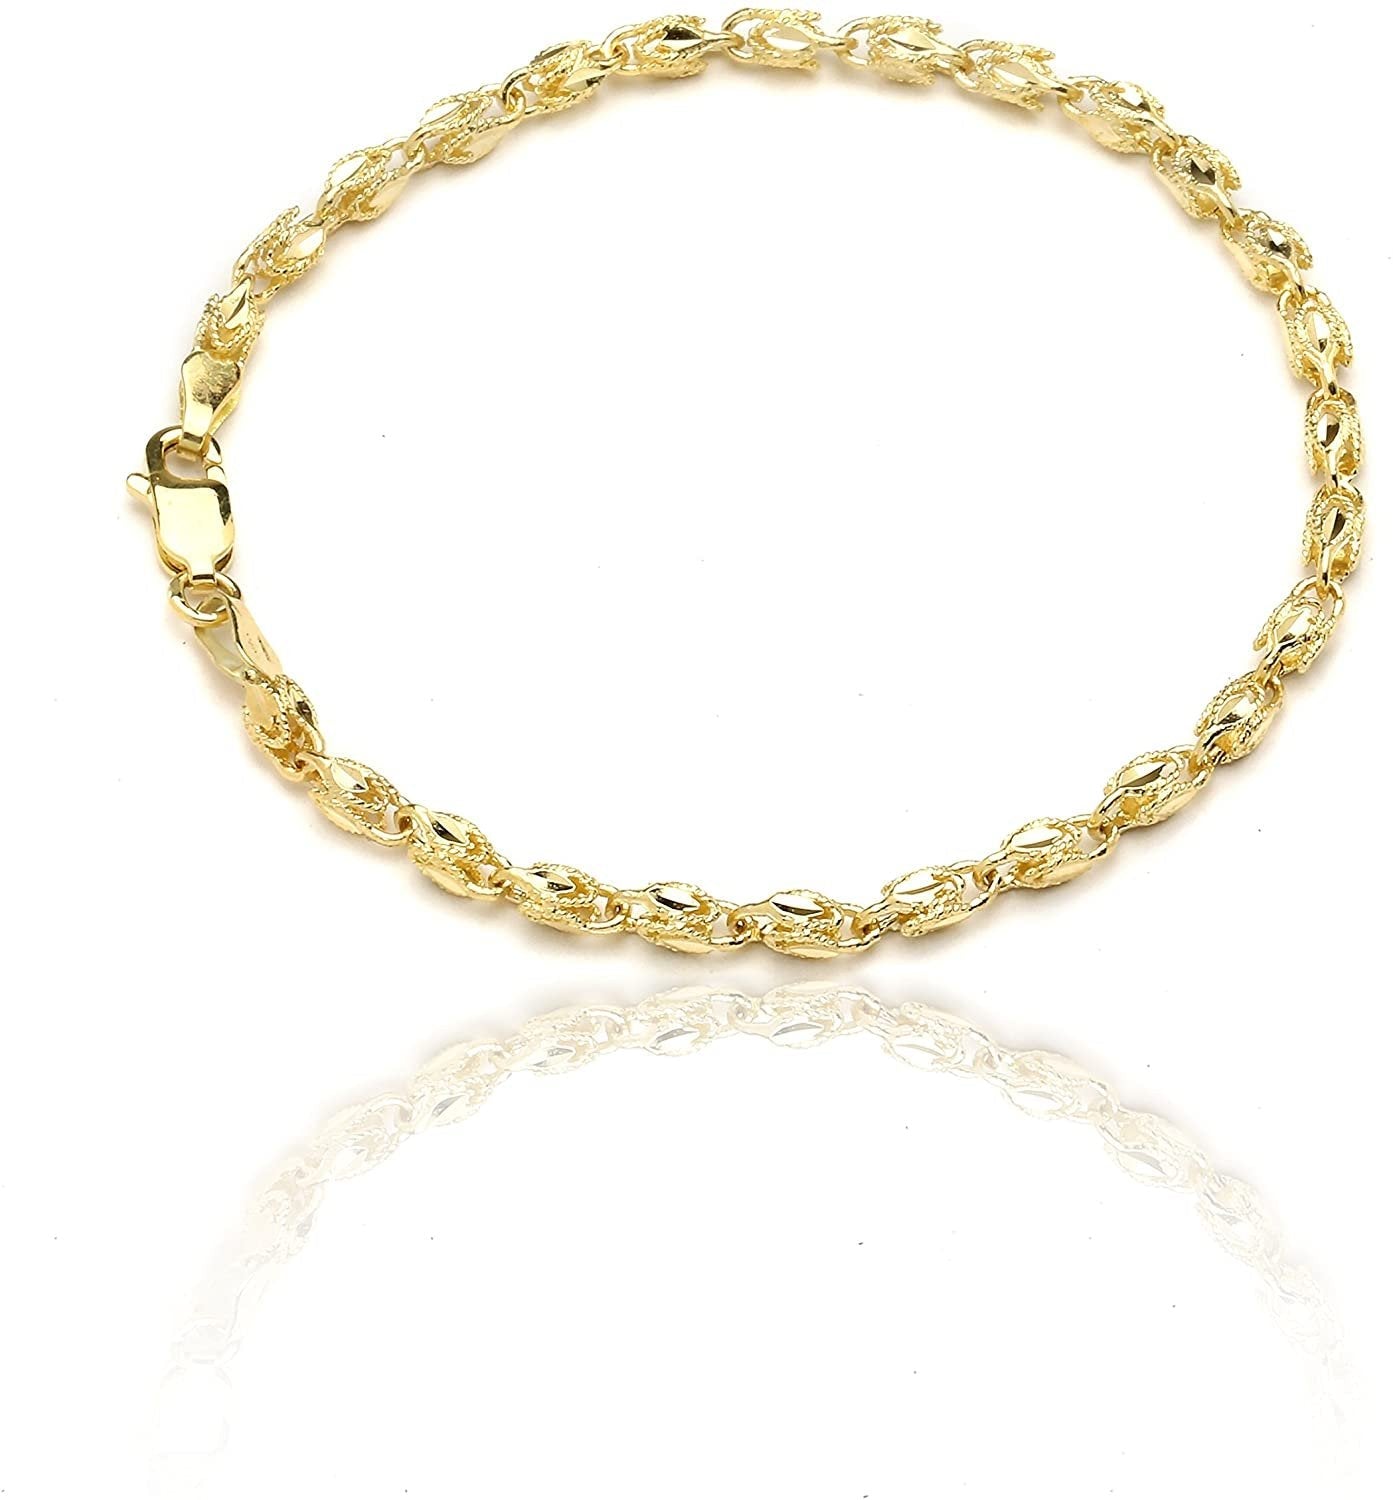 Floreo 10k Yellow Gold 2.5mm Turkish Rope Chain Bracelet and Anklet